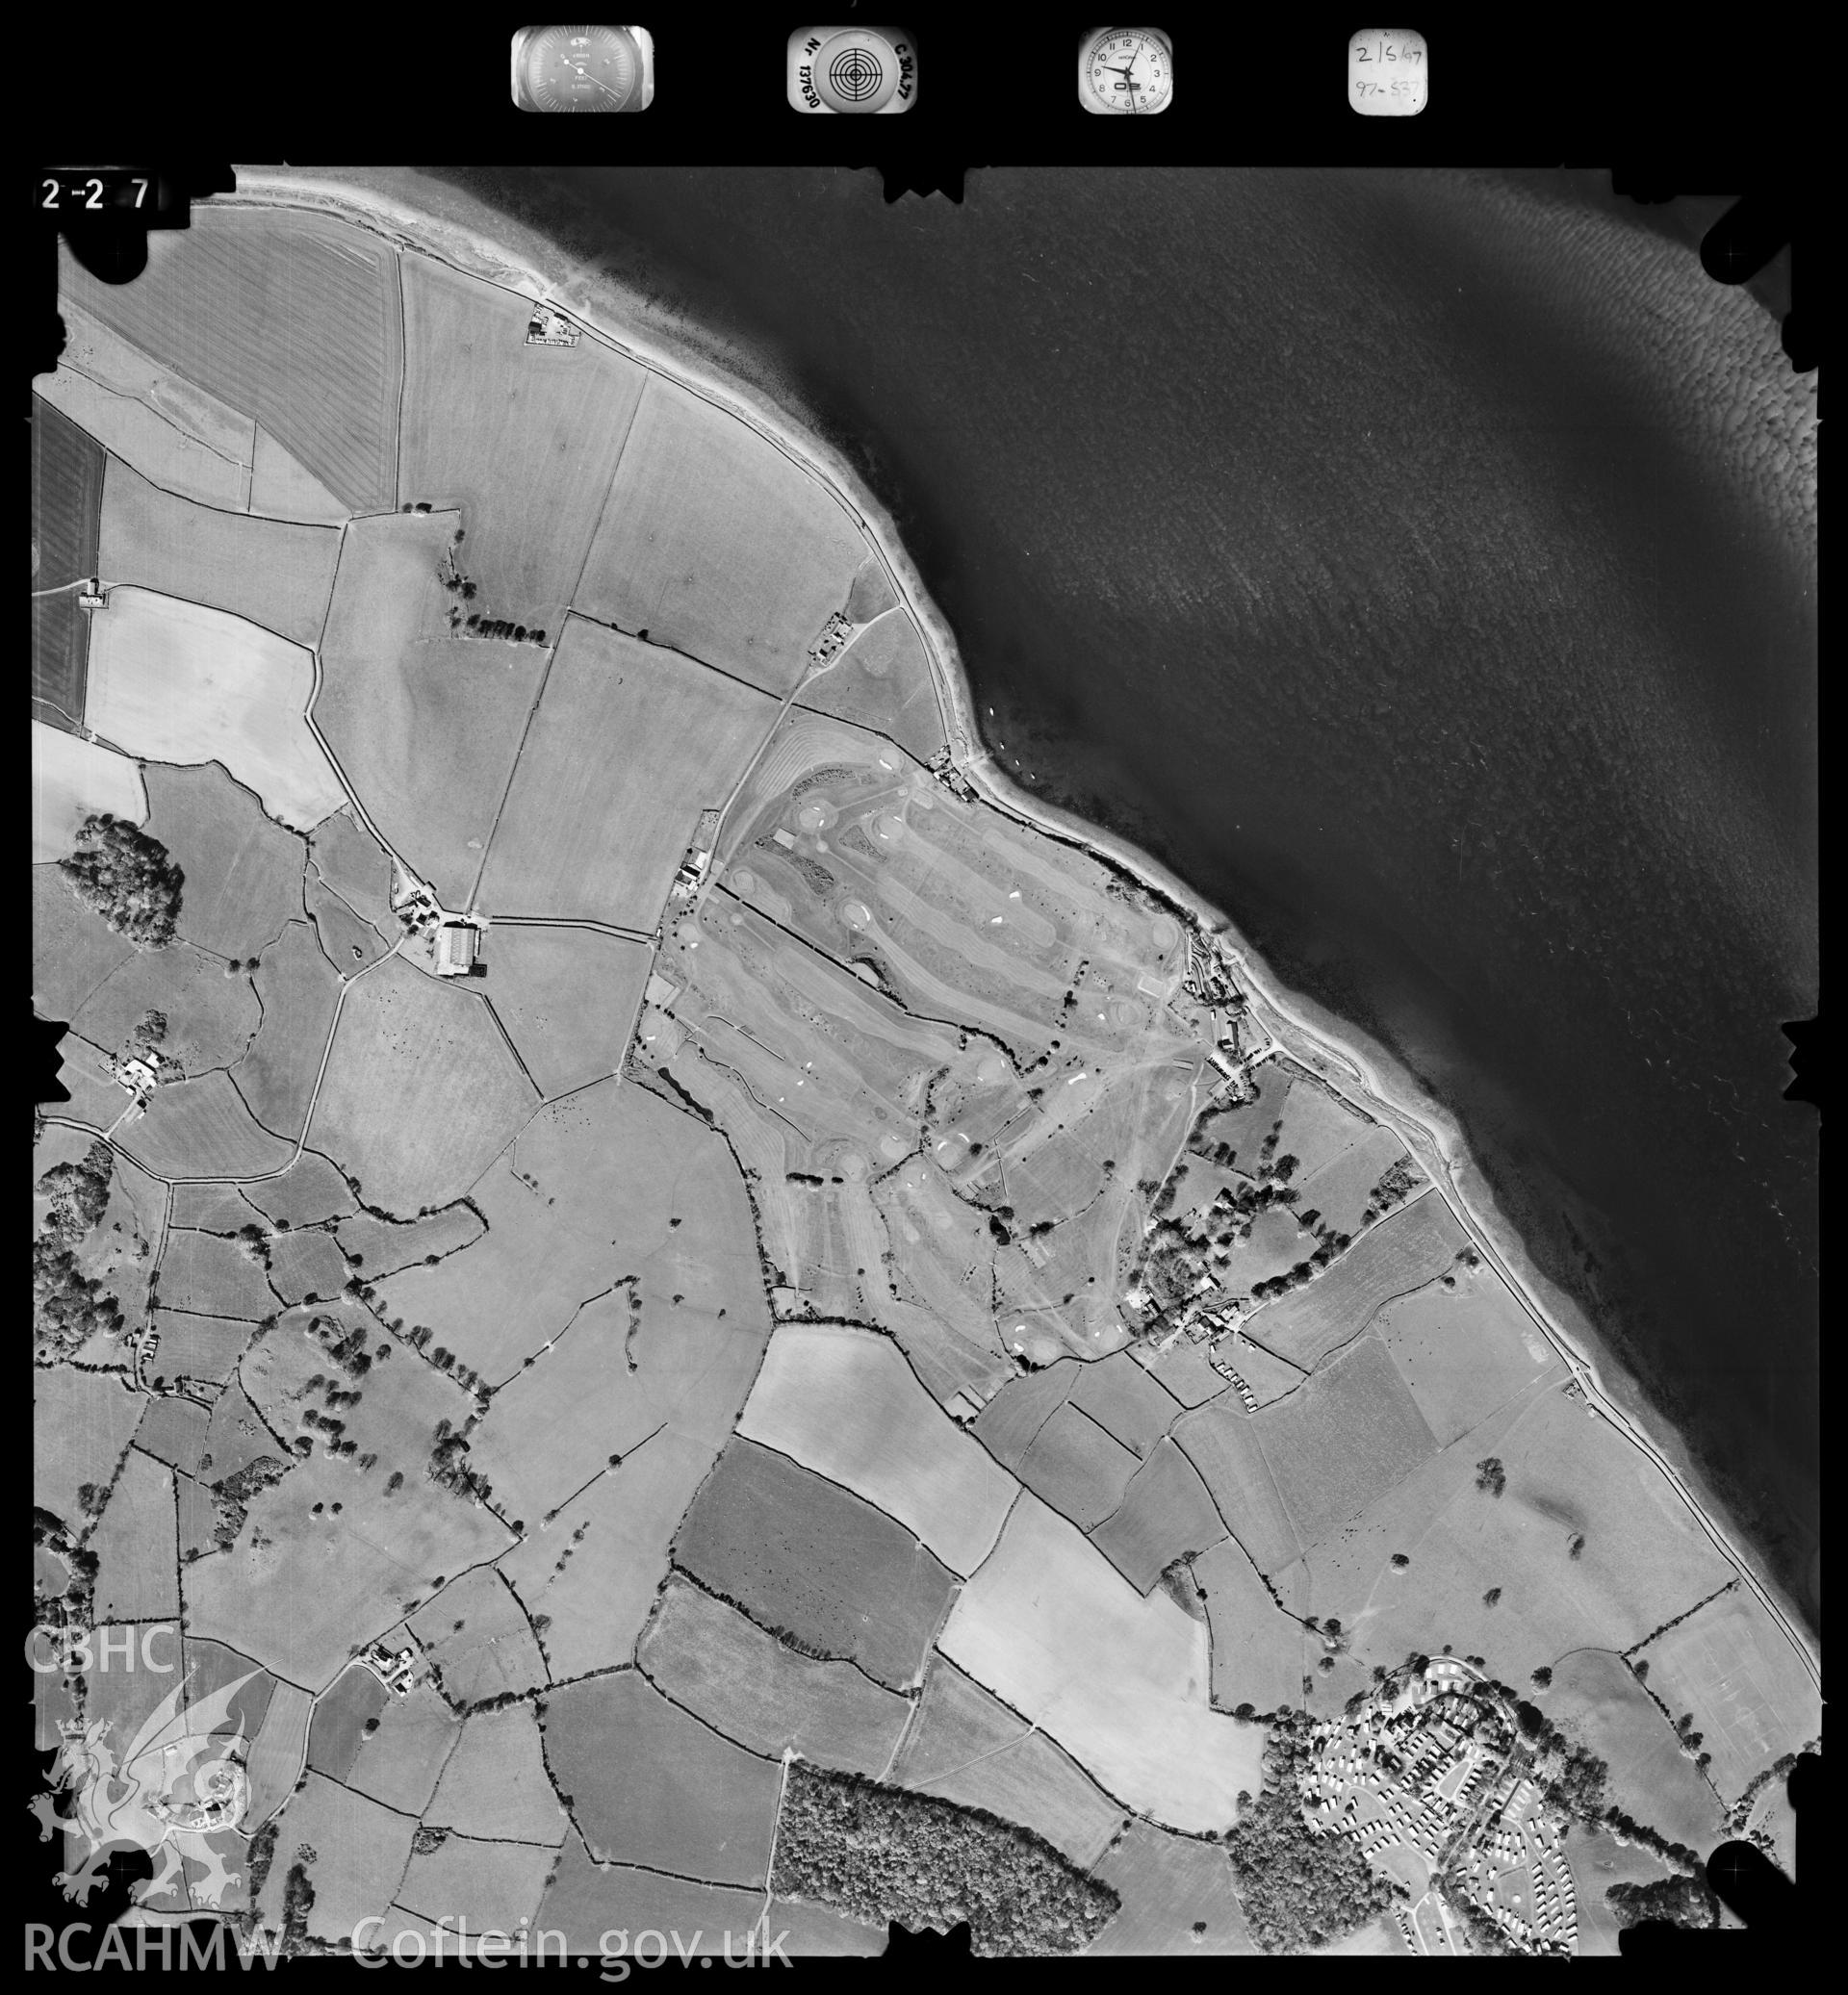 Digitized copy of an aerial photograph showing the Menai straits area, taken by Ordnance Survey, 1997.